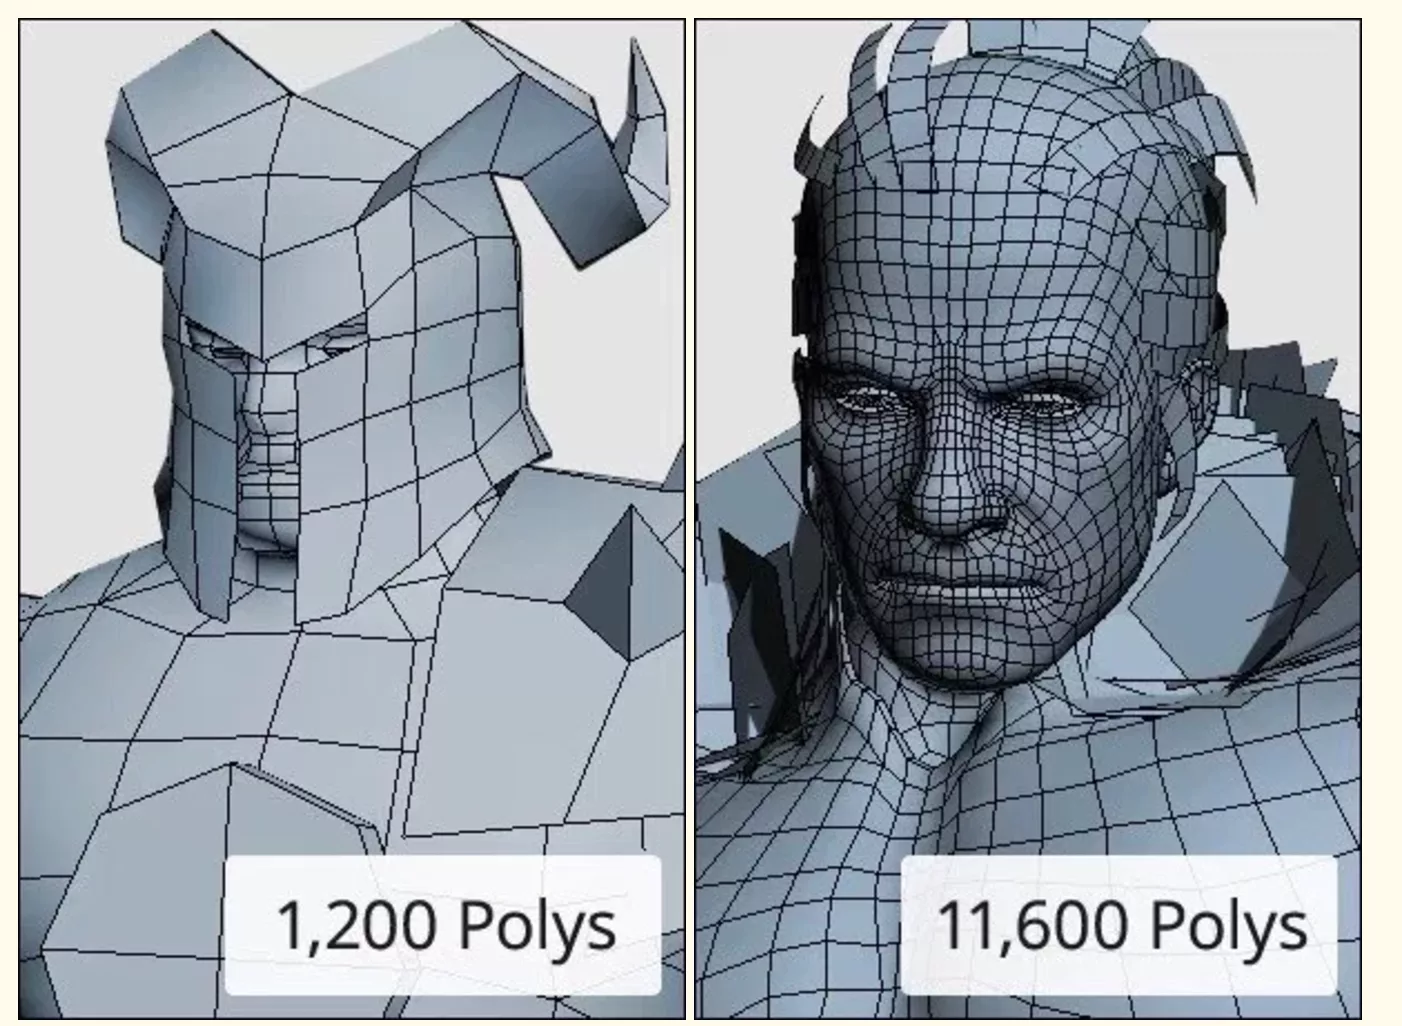 An example of how increasing the polygon count increases the amount of detail available in an image.